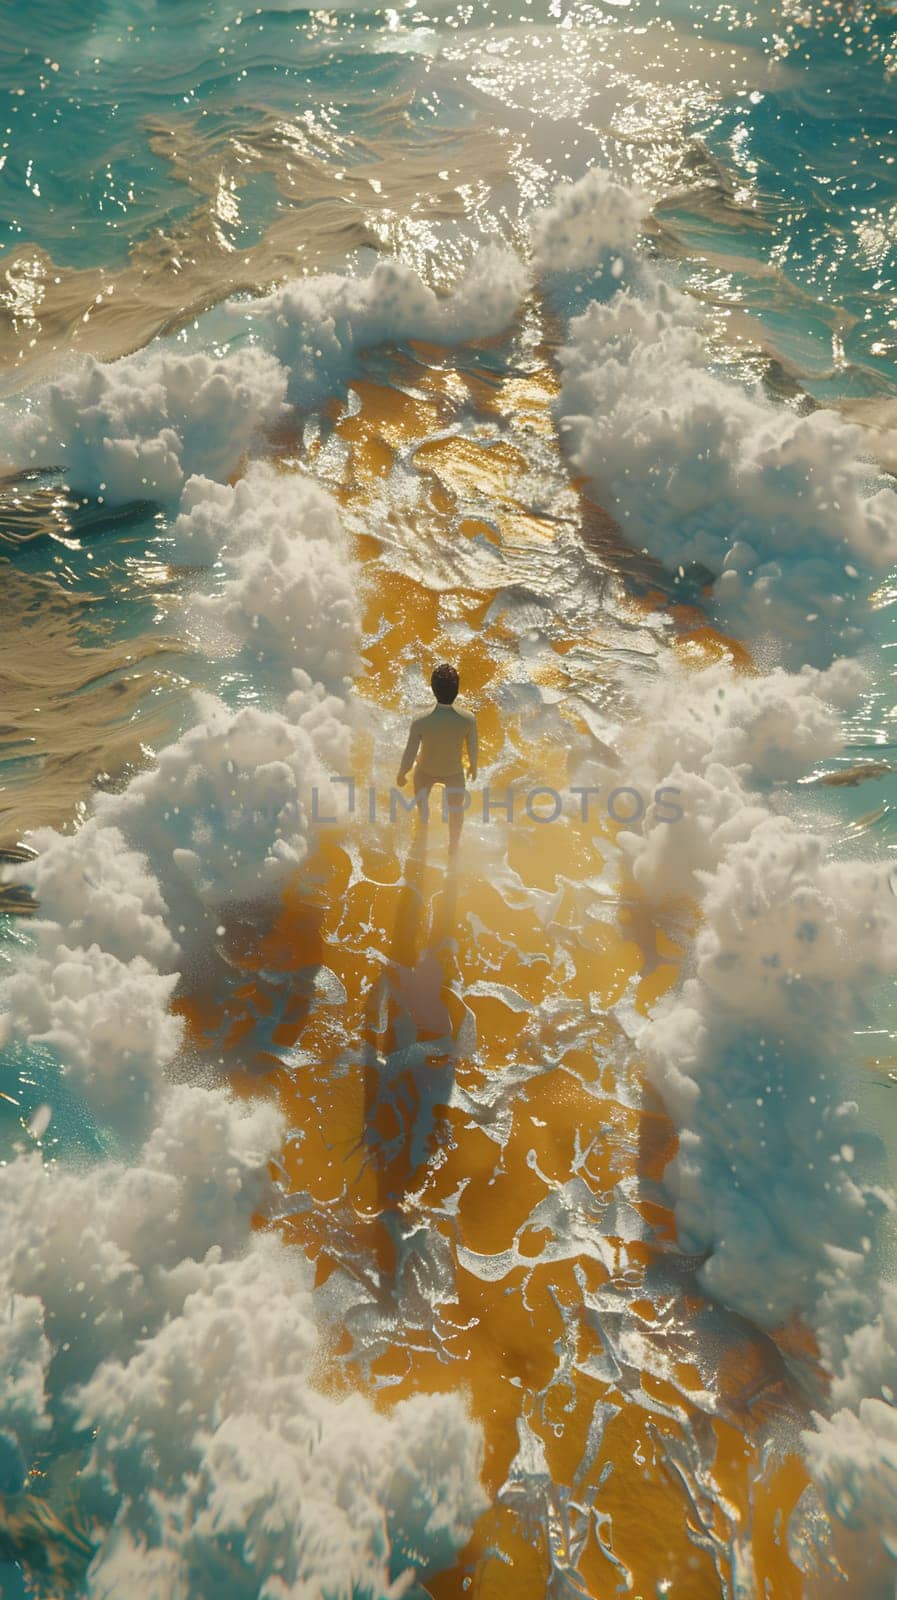 Man on surfboard in liquid landscape, resembling a painting by Nadtochiy